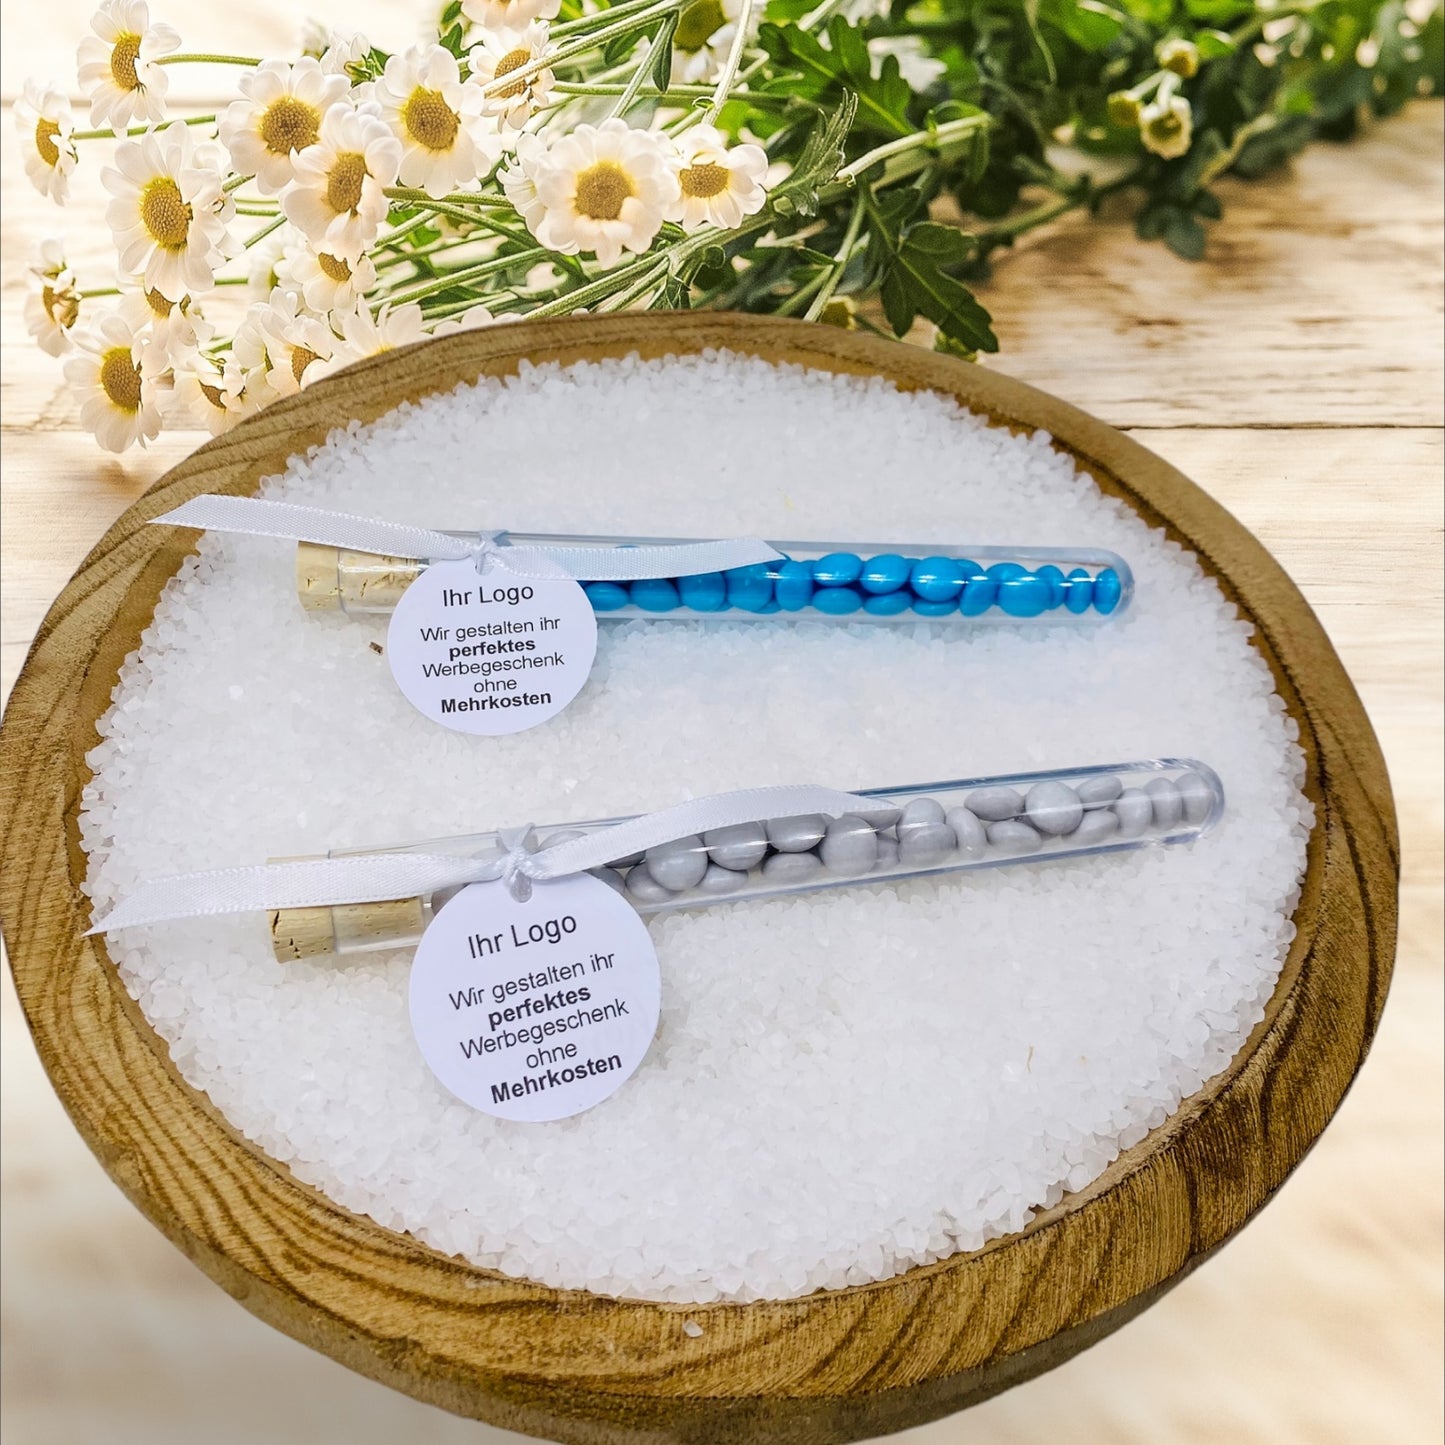 Promotional gifts with style: Personalized test tubes for lasting impressions!